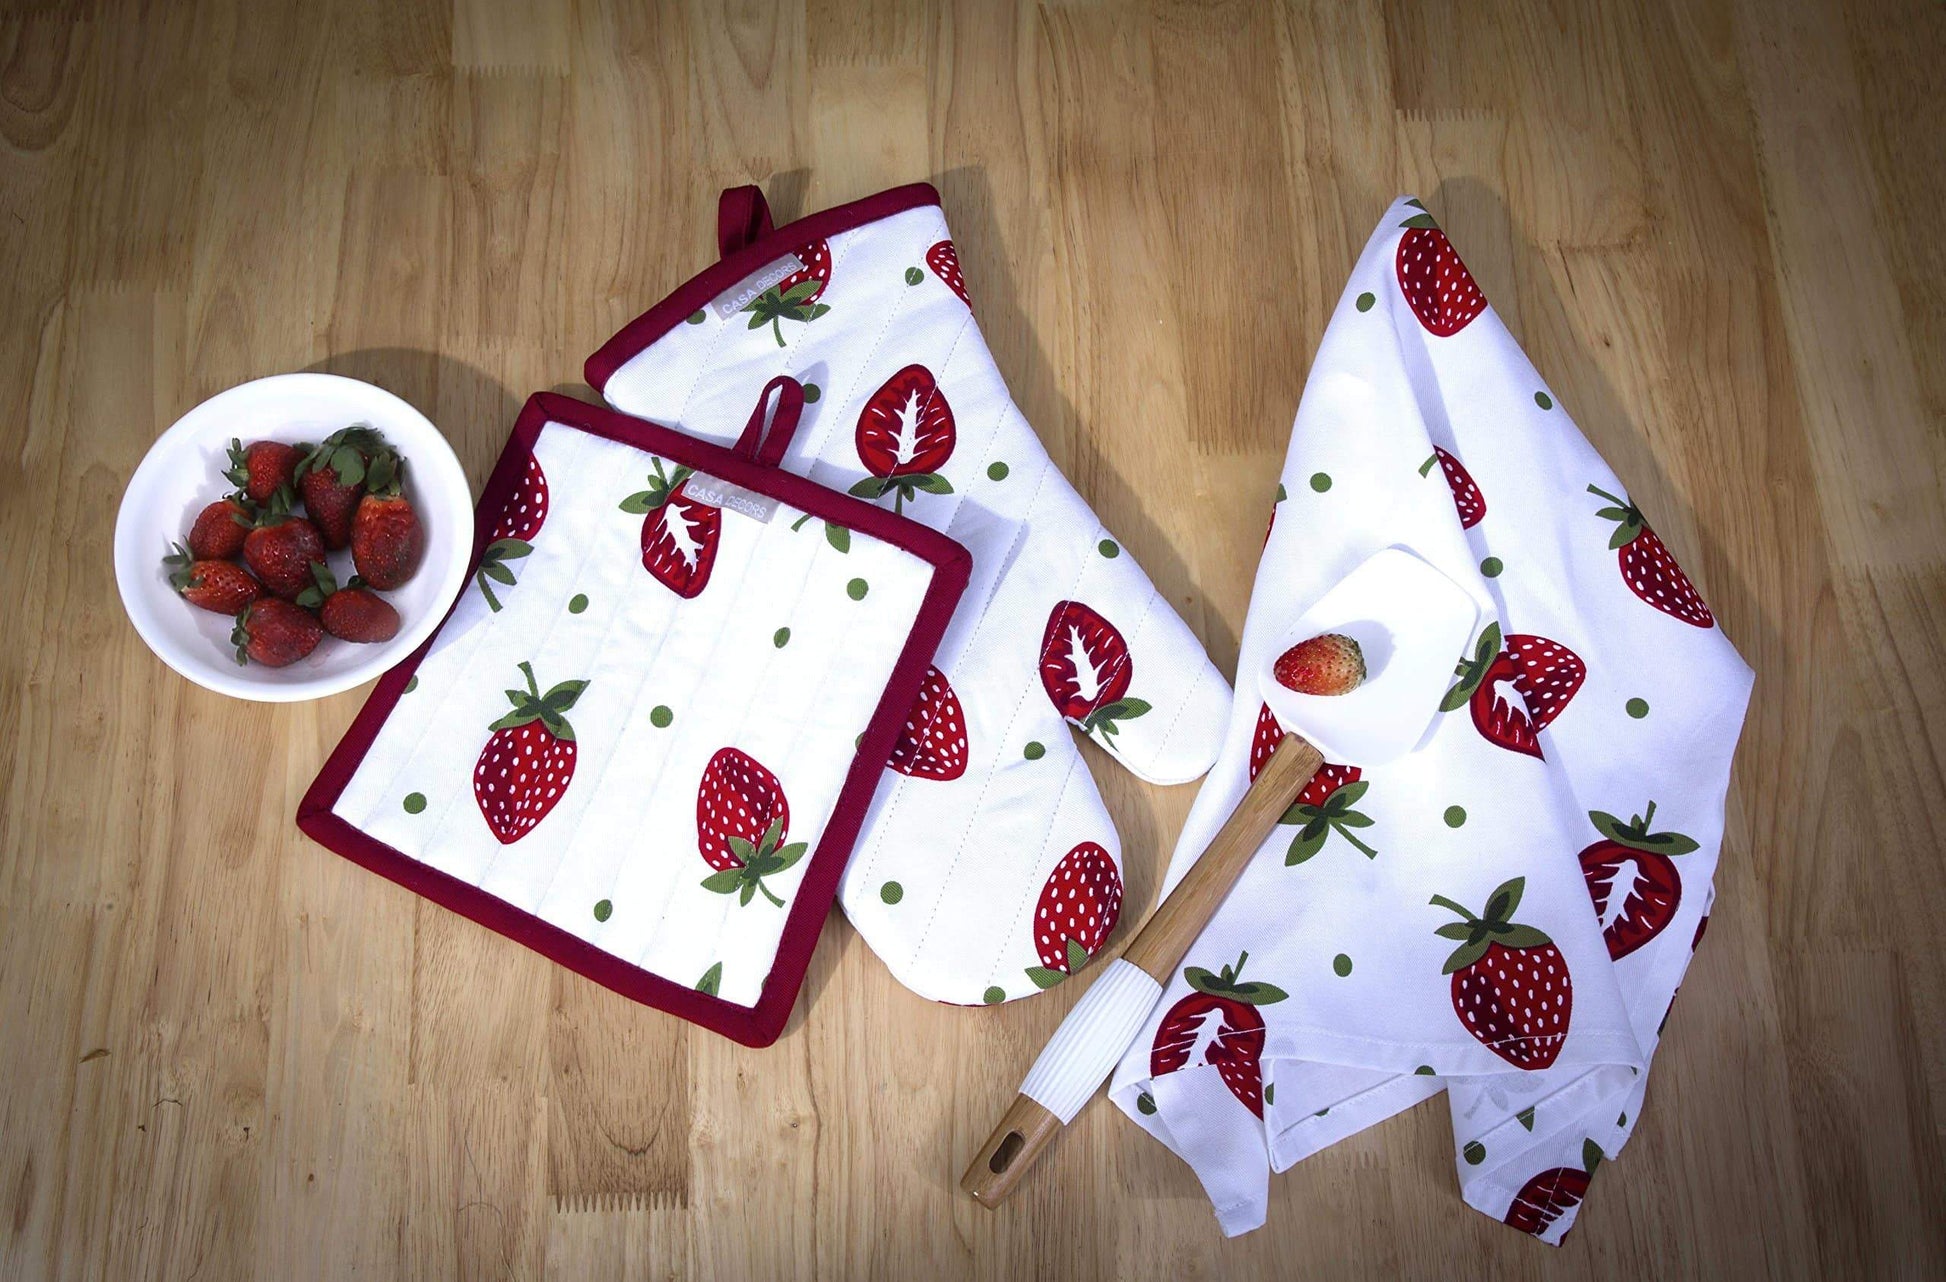 Organize with casa decors set of apron oven mitt pot holder pair of kitchen towels in a unique berry blast design made of 100 cotton eco friendly safe value pack and ideal gift set kitchen linen set